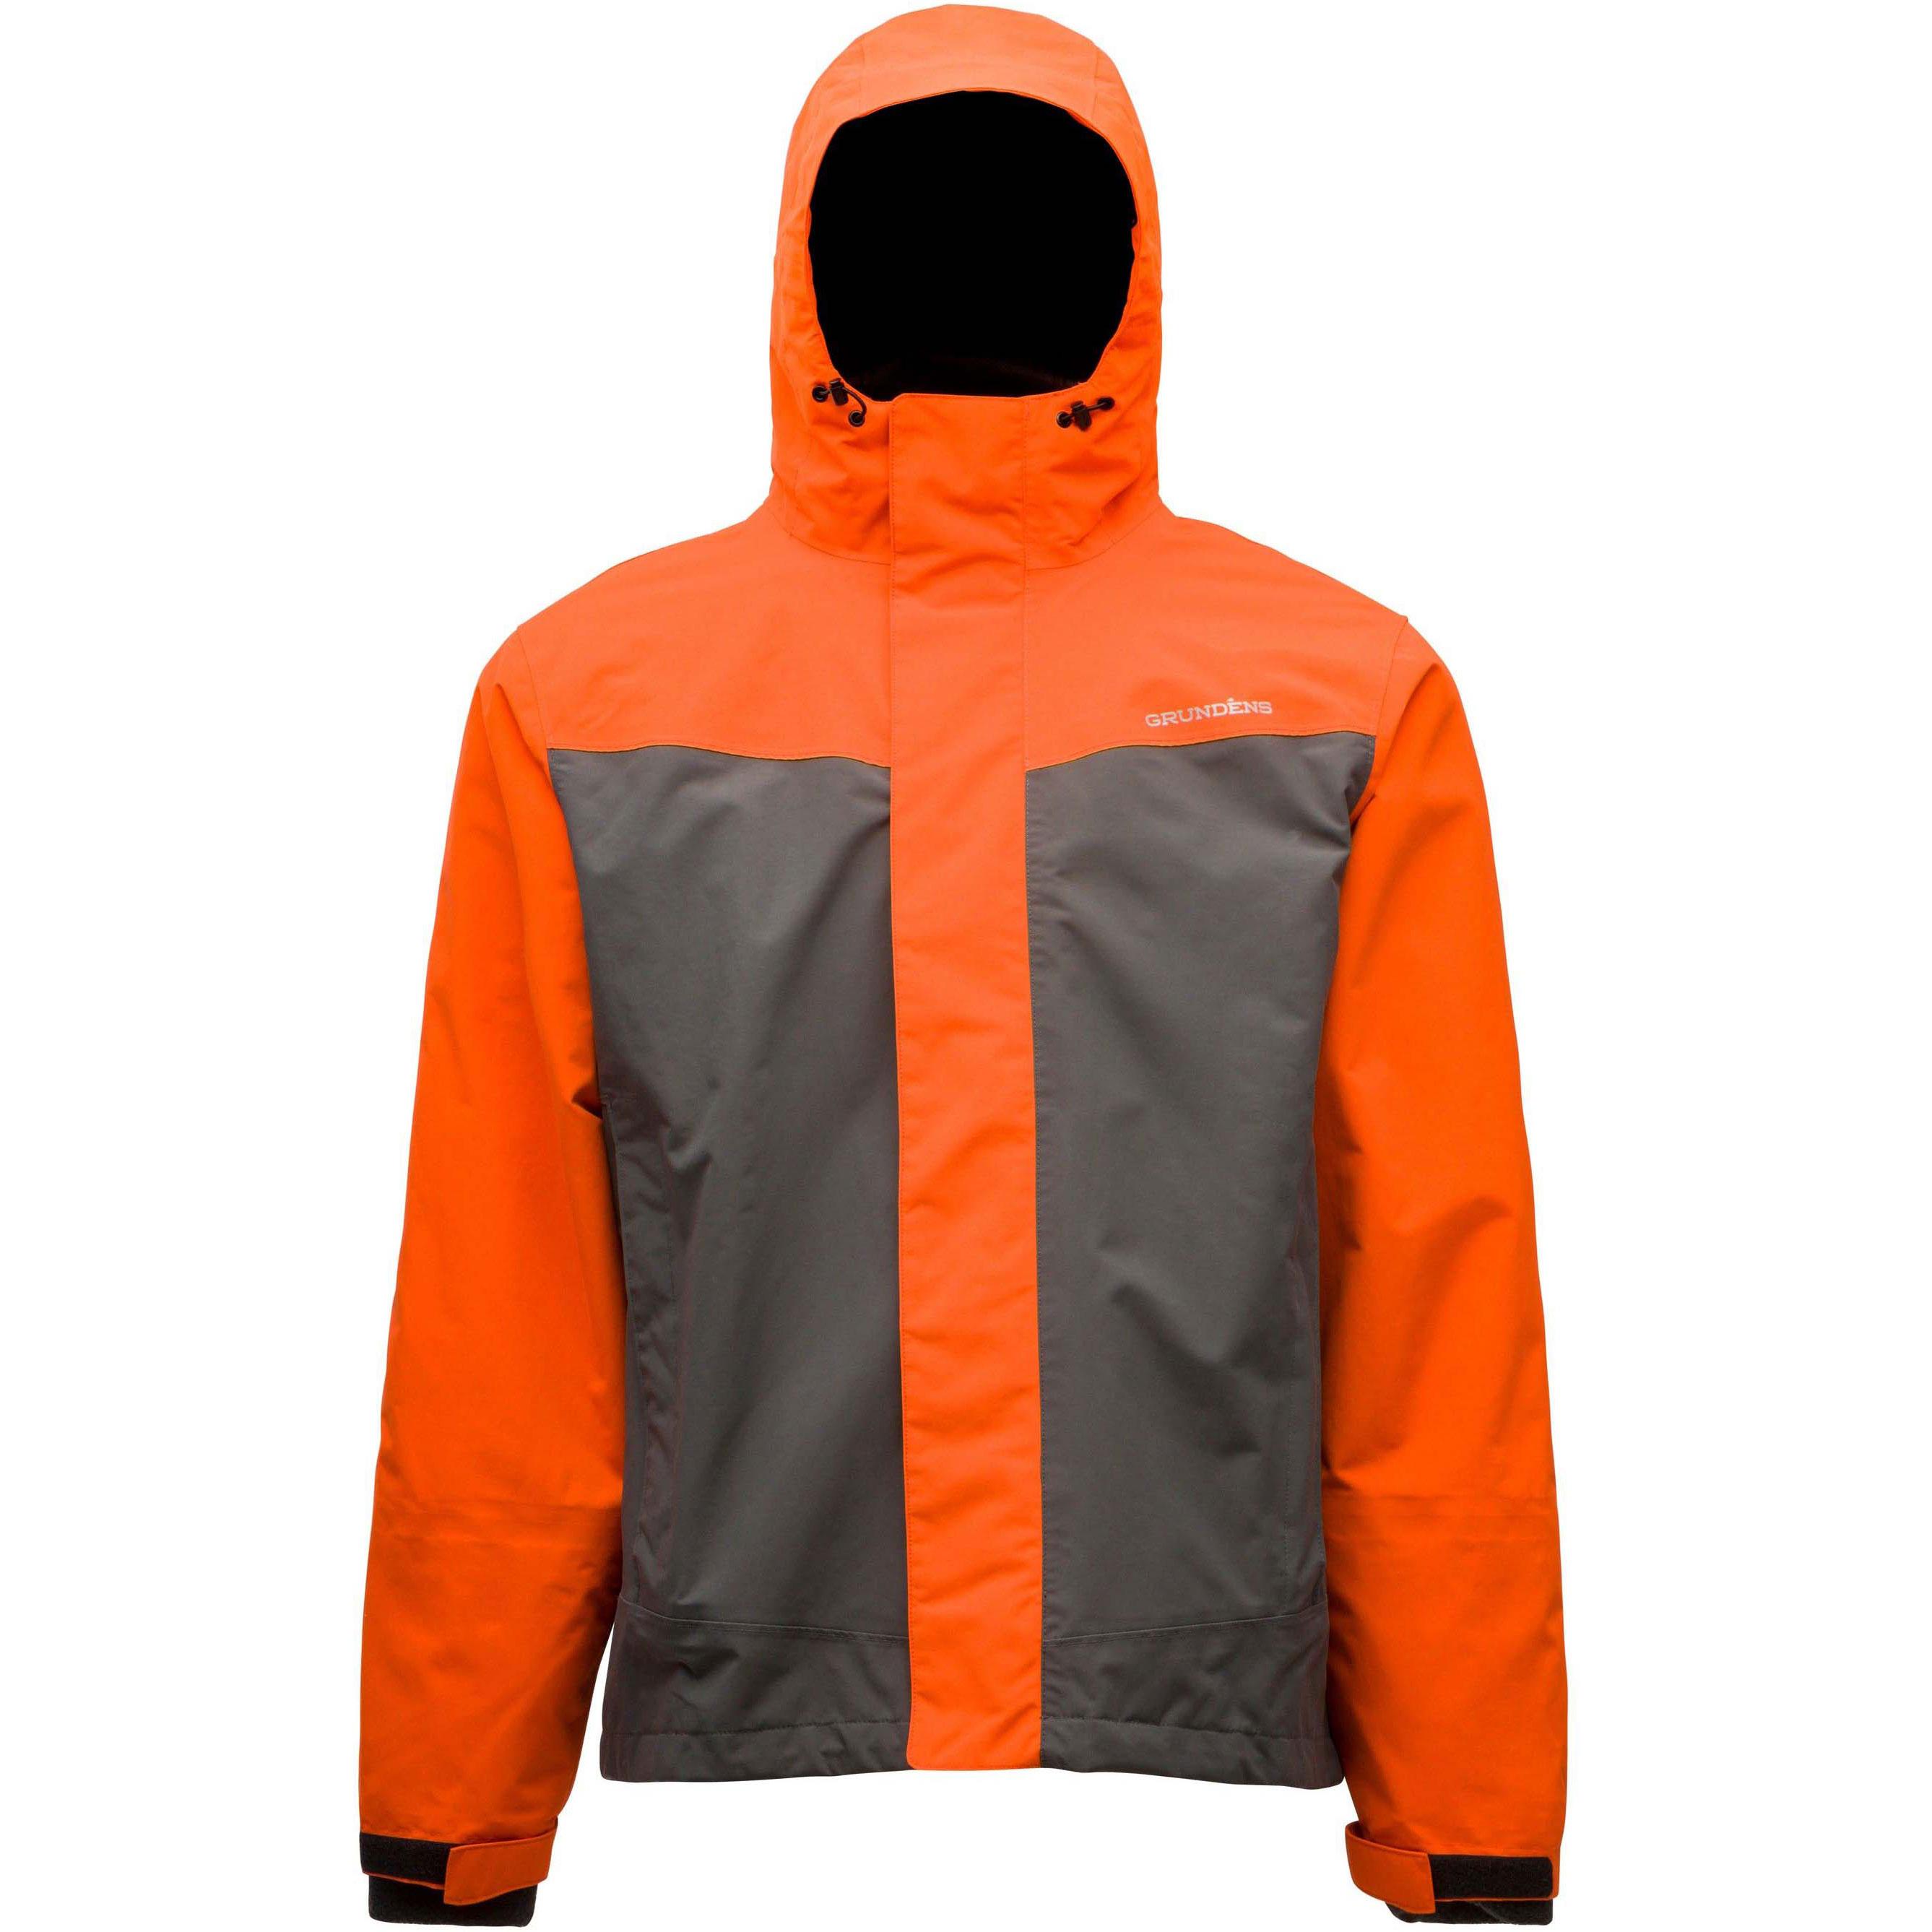 Shop for Grundens Full Share 3-in-1 Lined Jacket at Go2marine.com